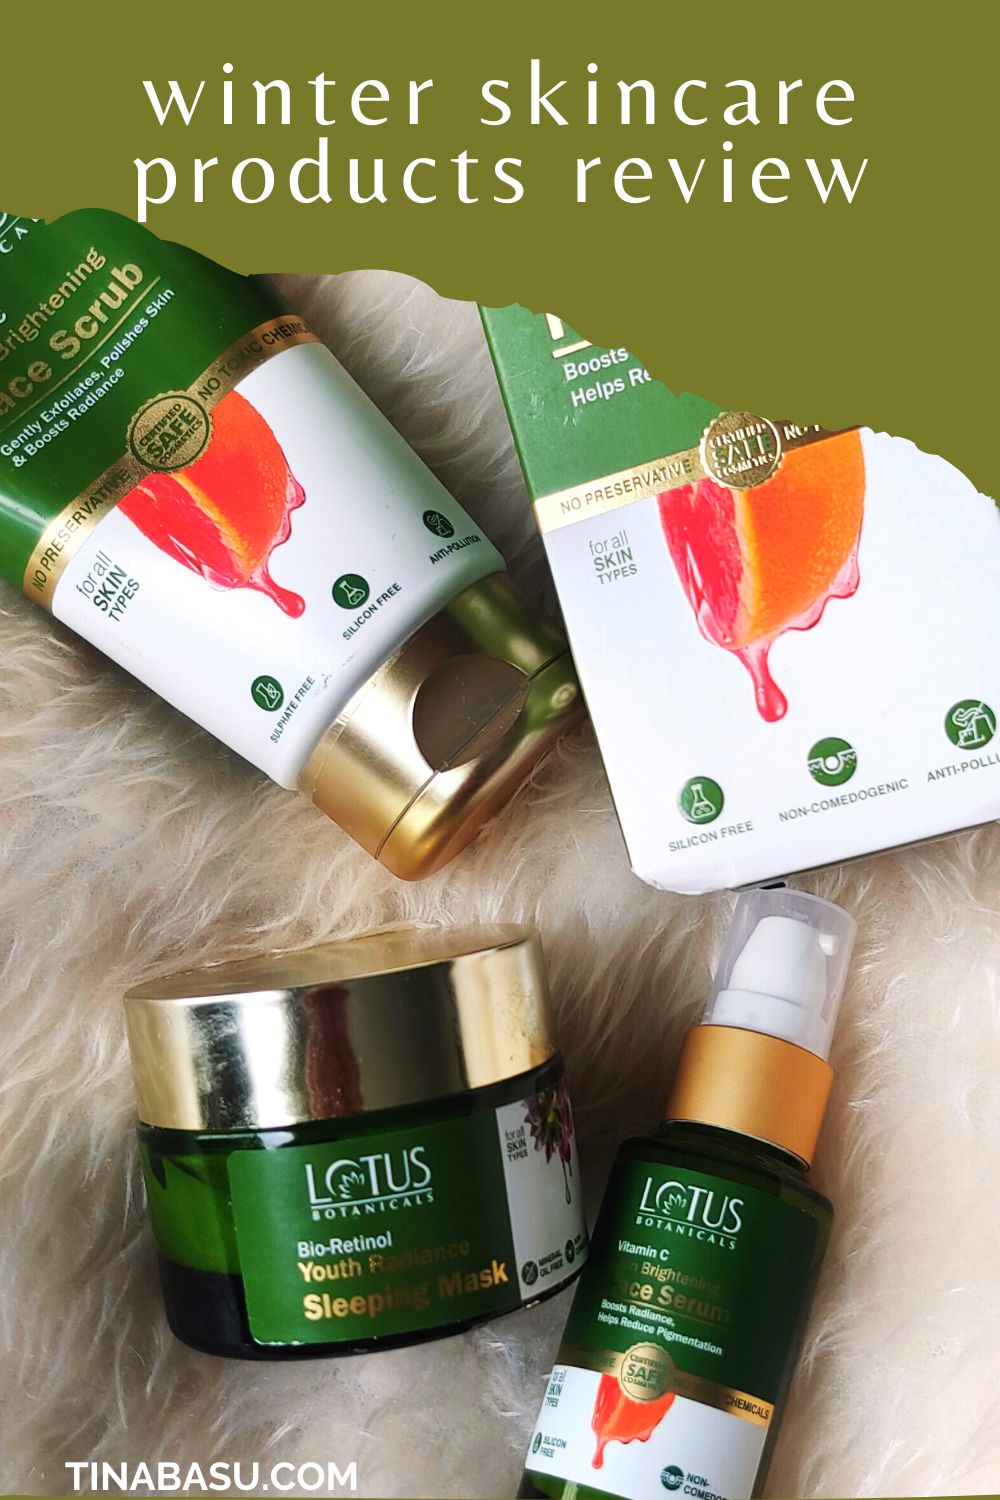 winter-skincare-products-review-lotus-vitamin-c-serum-review